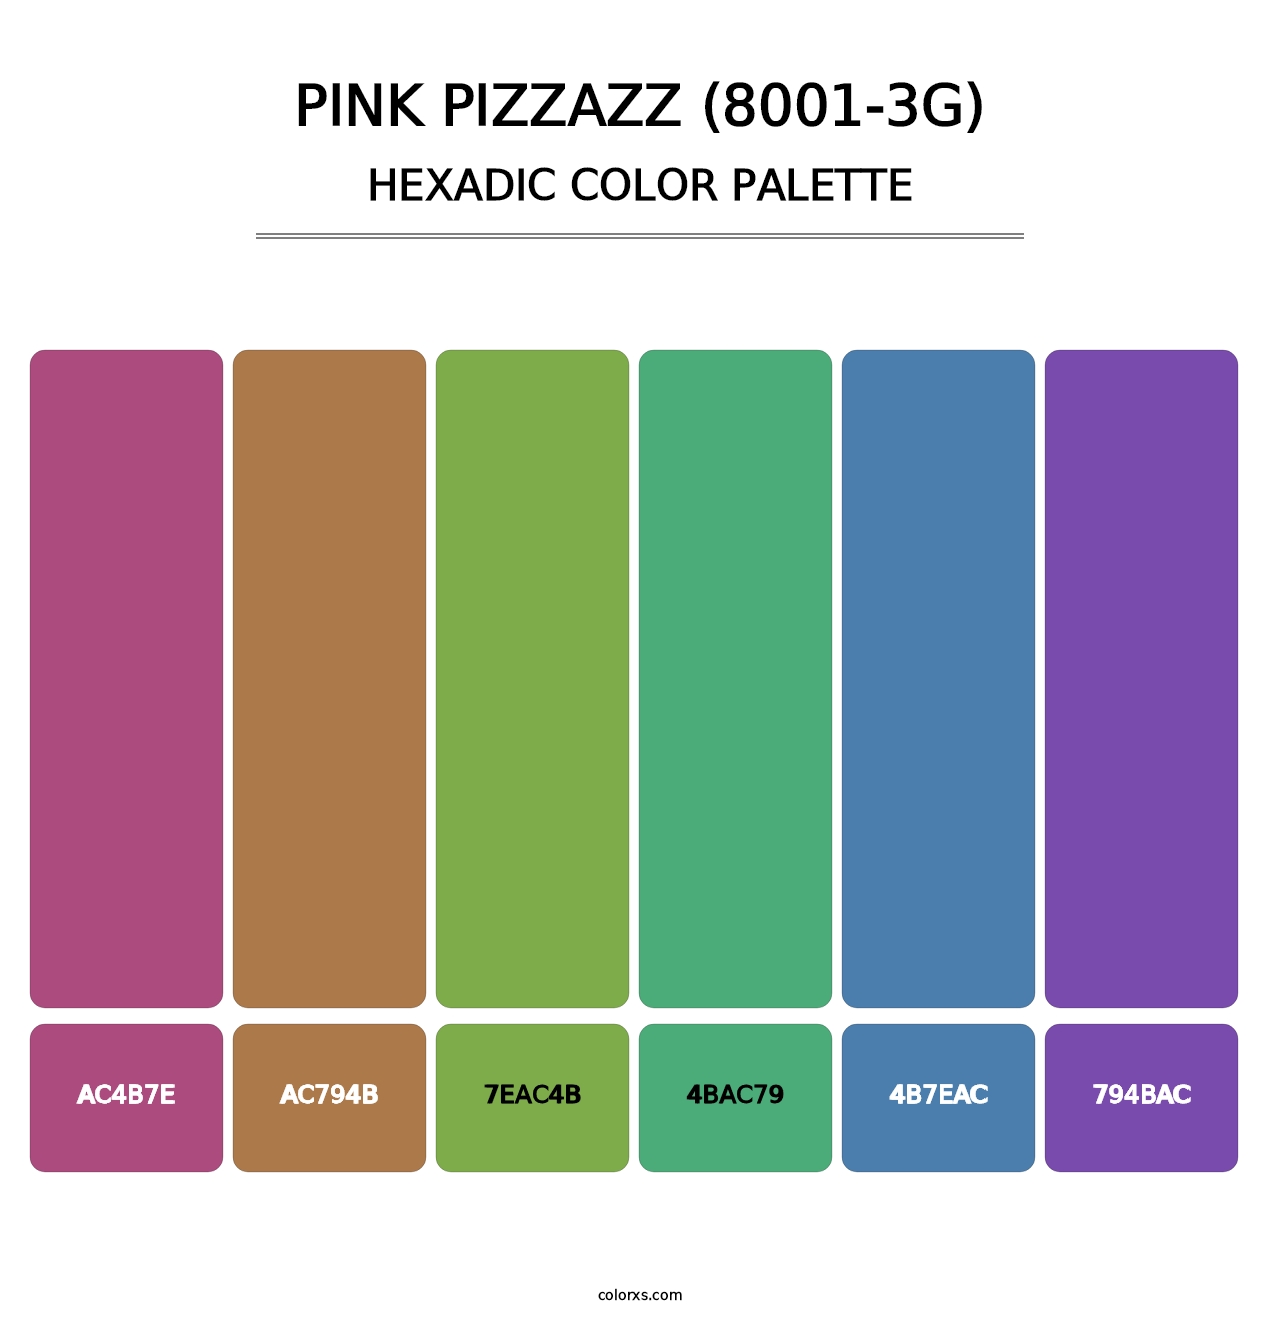 Pink Pizzazz (8001-3G) - Hexadic Color Palette